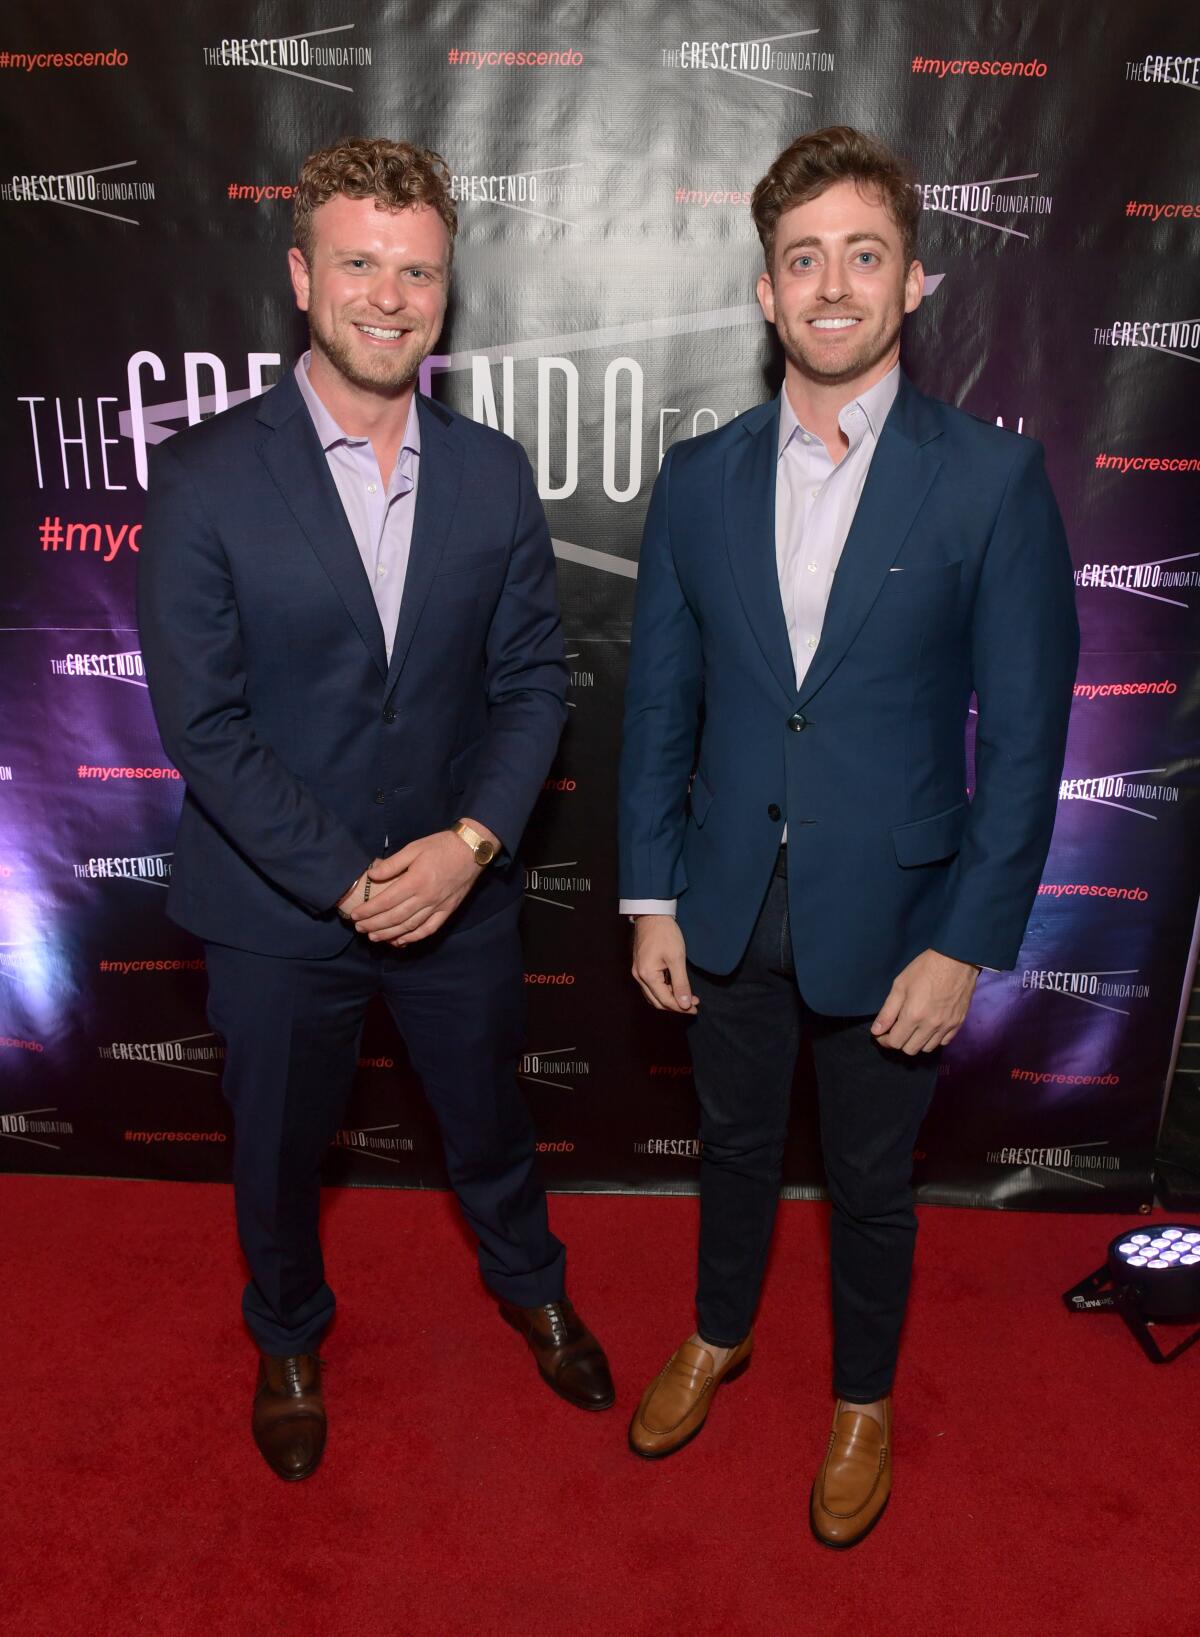 Two men in blue jackets stand on a red carpet.